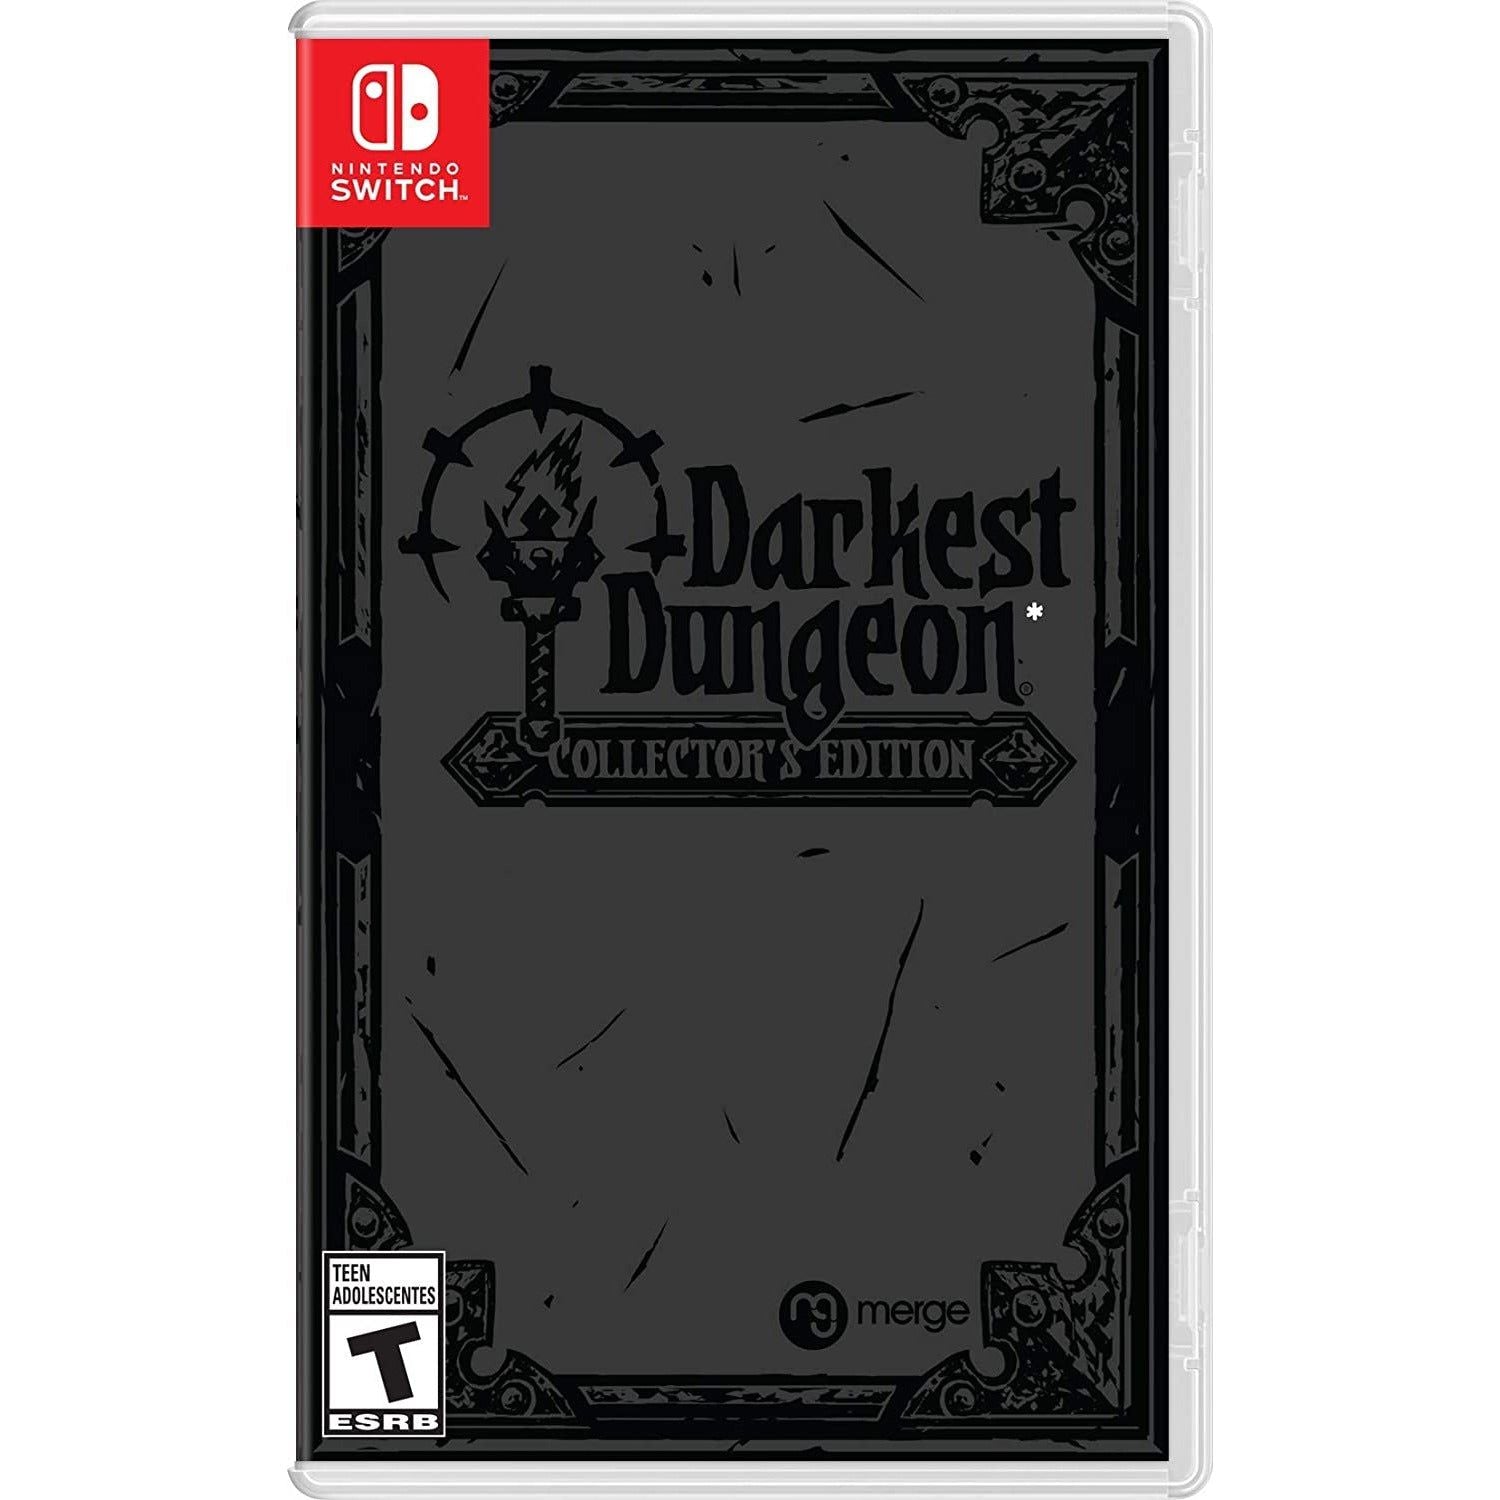 Switch - Darkest Dungeon Collector's Edition (In Case / Game Only)